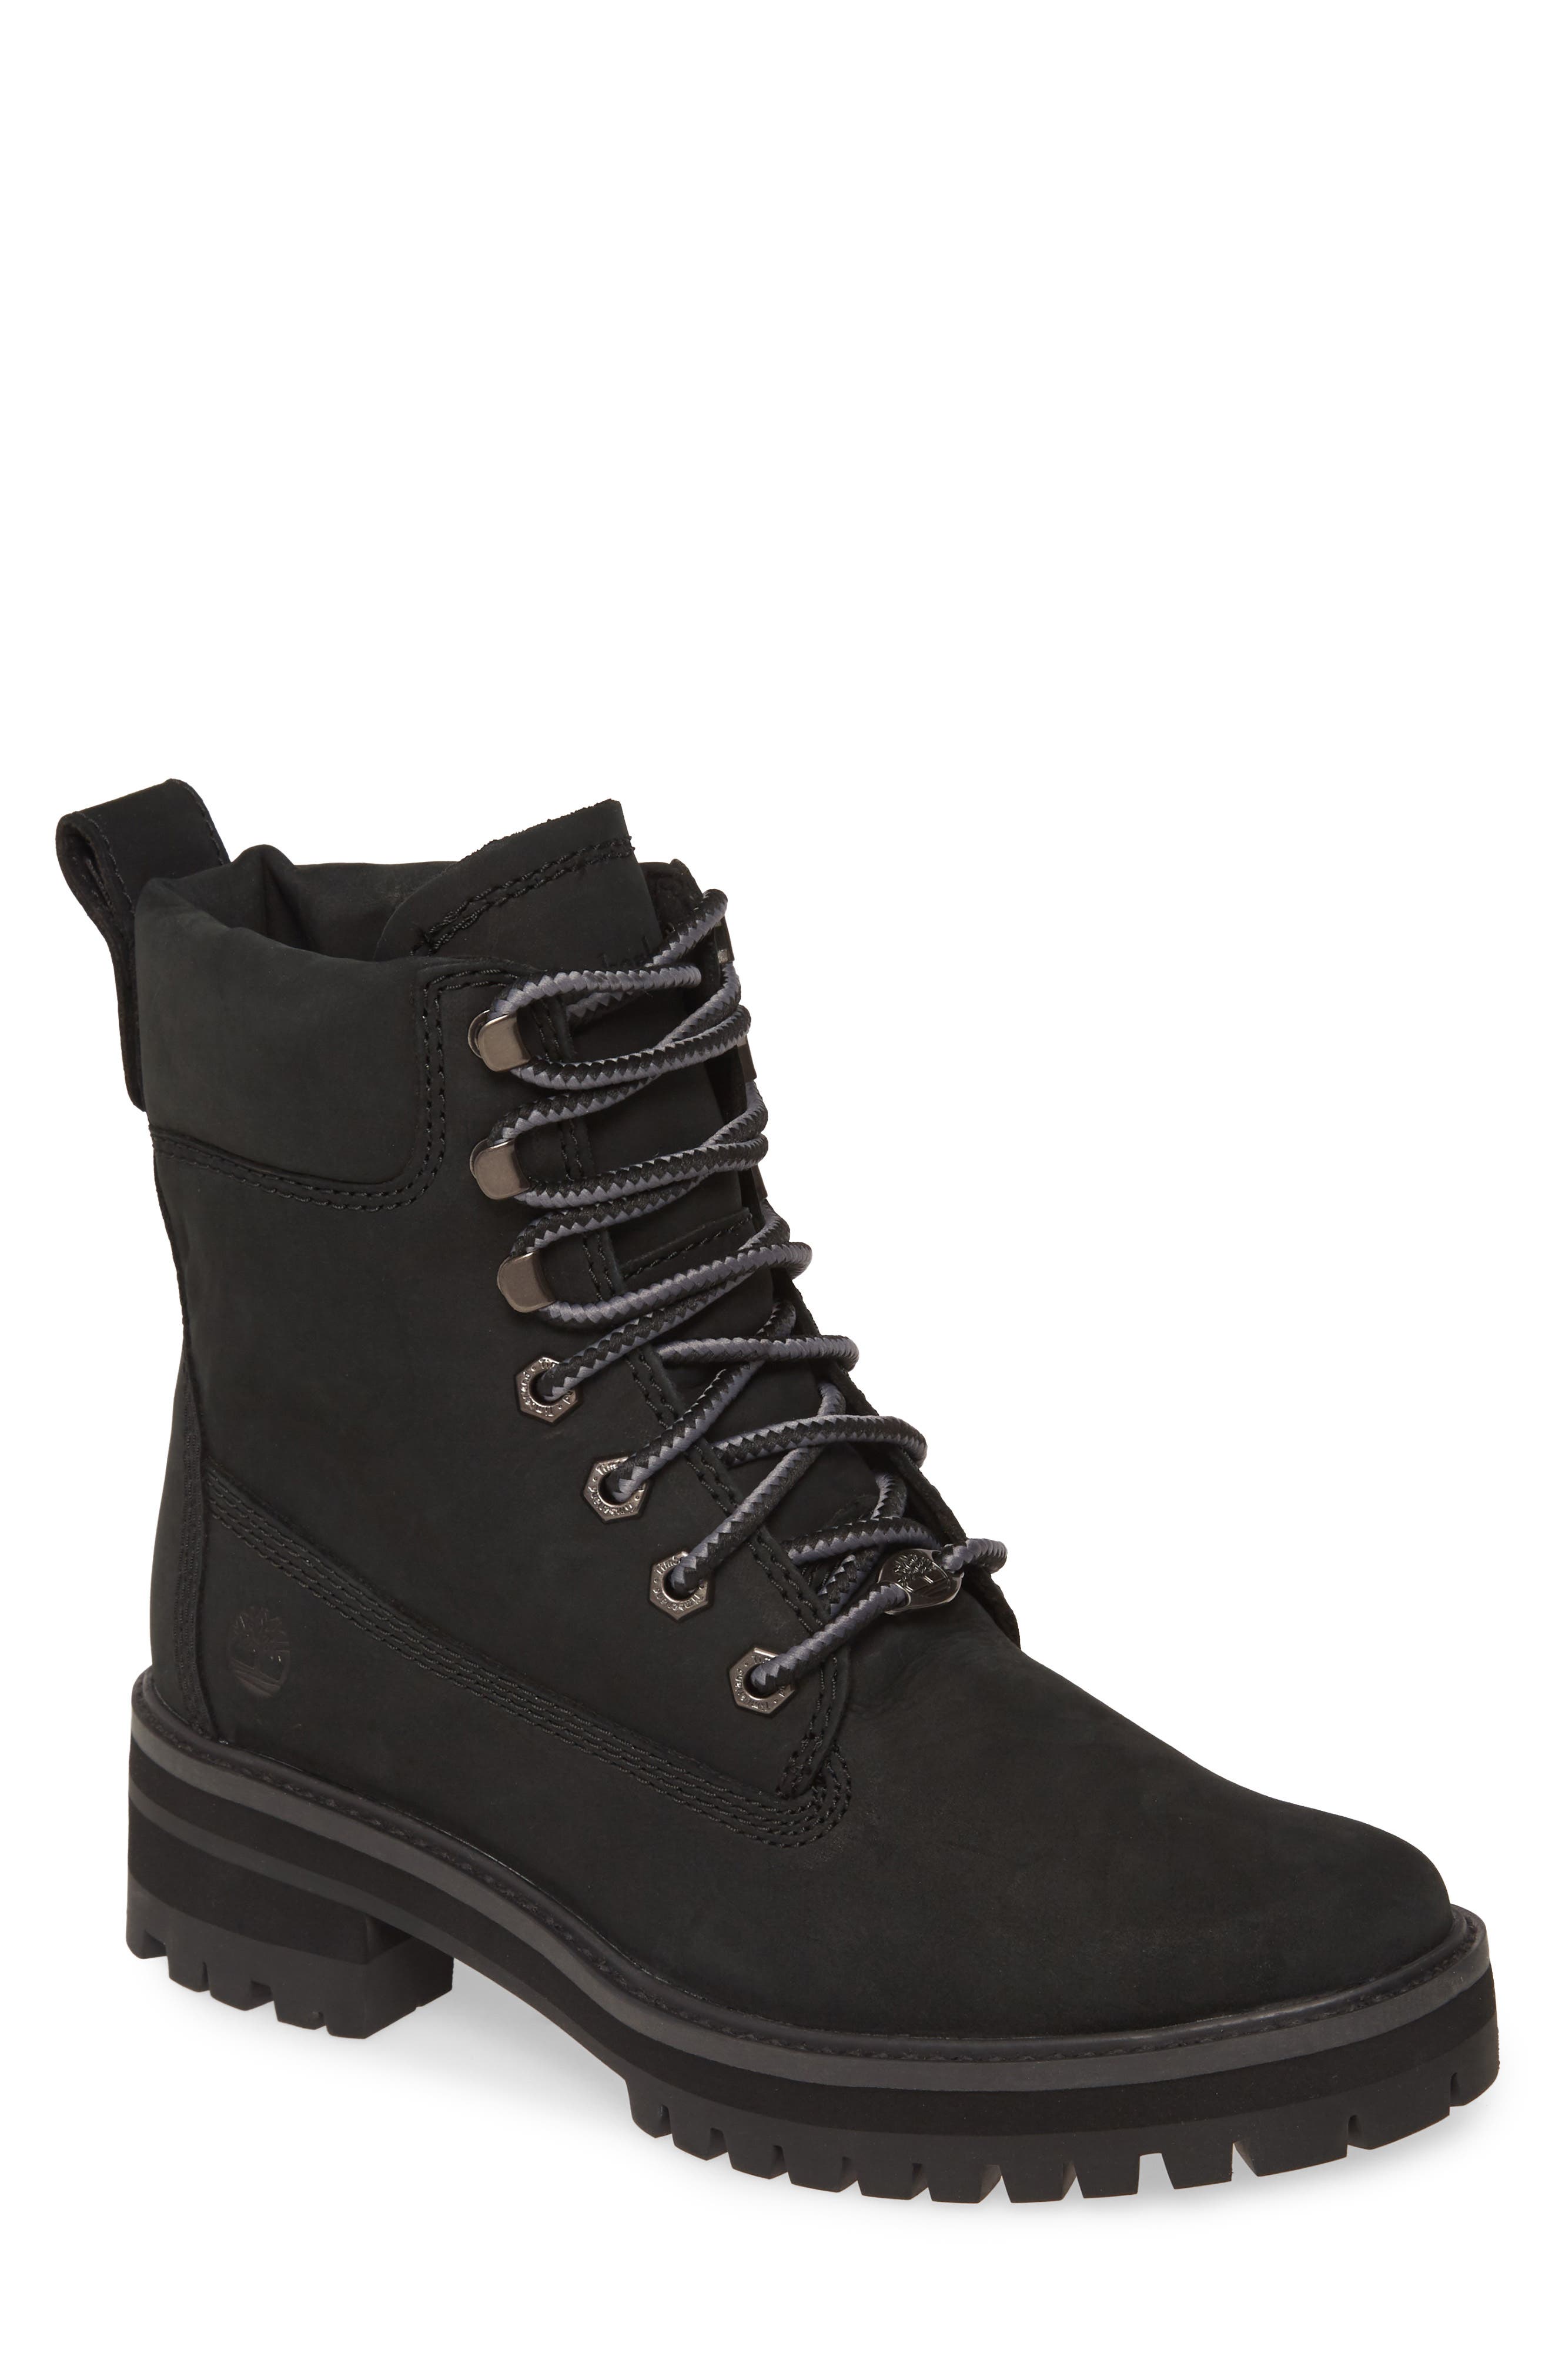 nordstrom hiking boots women's